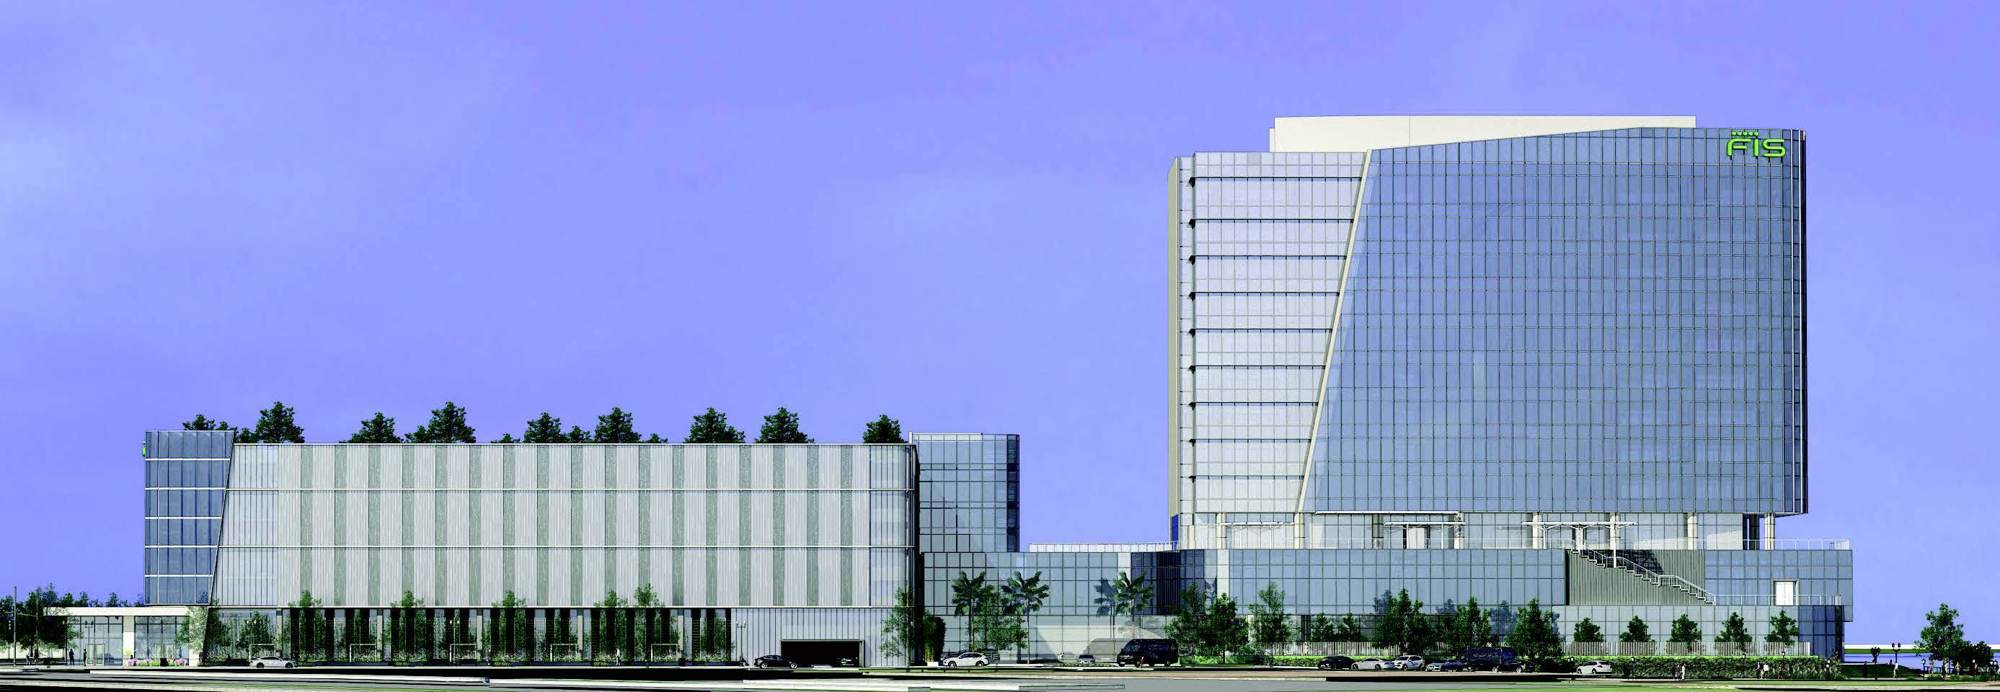 The FIS headquarters and its adjacent parking garage.